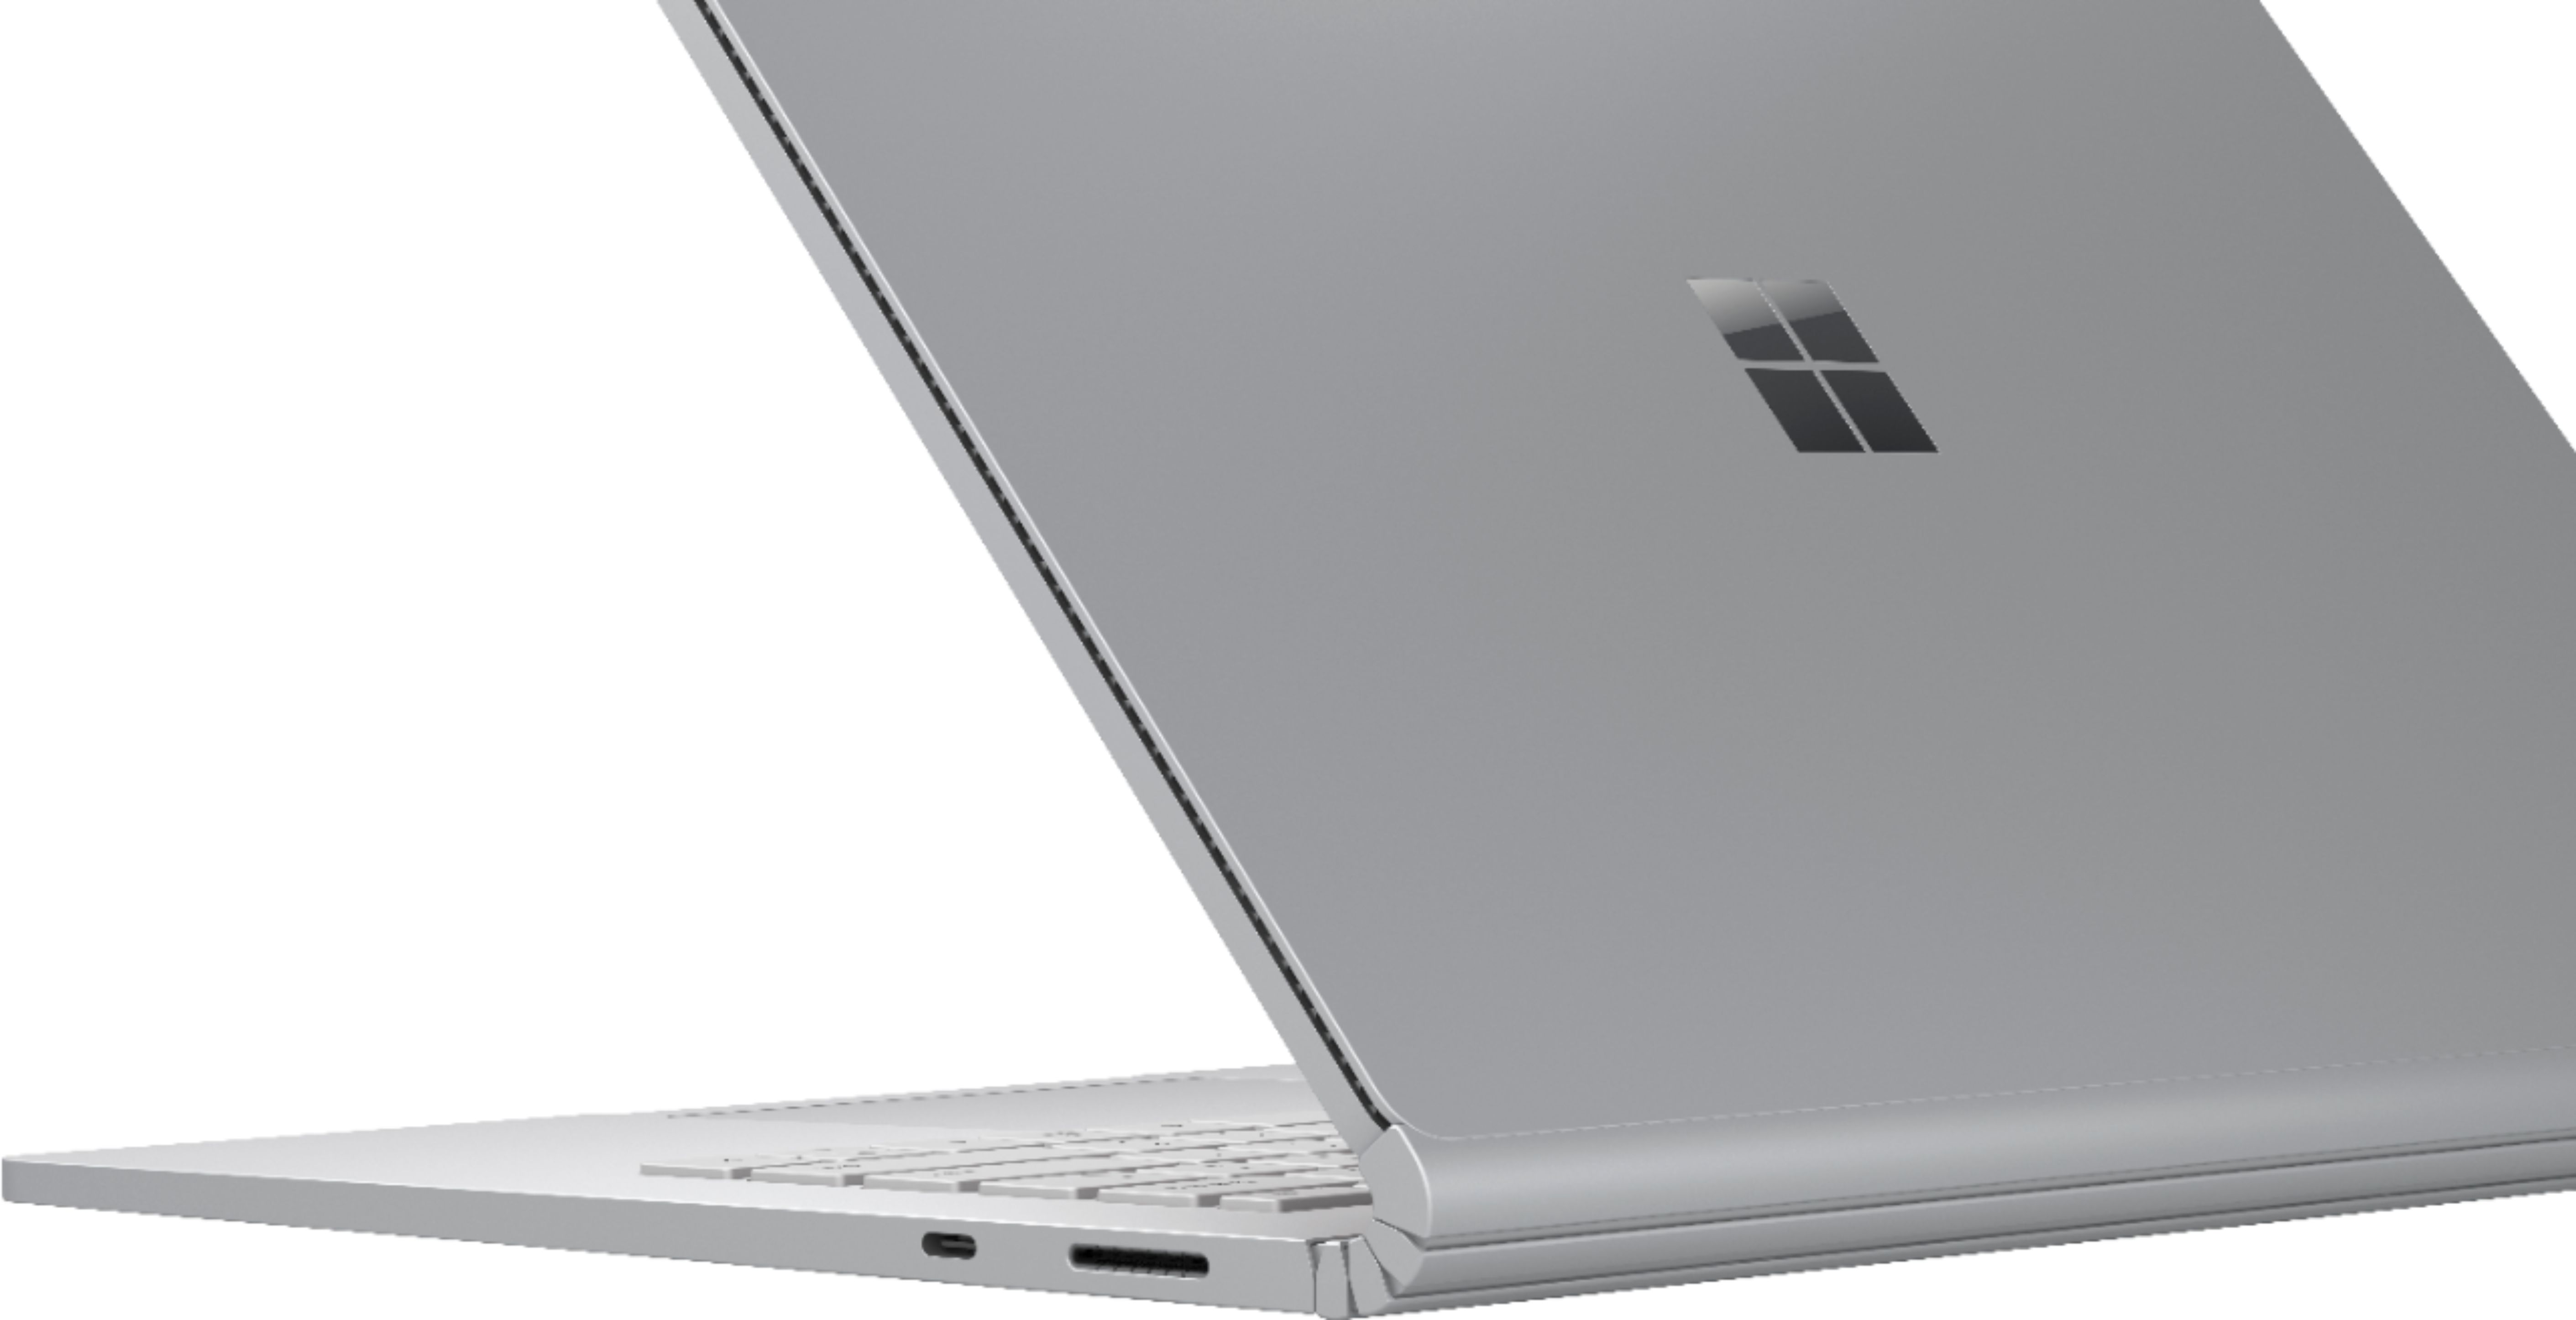 Microsoft Surface Book 3 13.5" Touch-Screen PixelSense™ 2-in-1 Laptop Intel Core i5 8GB Memory